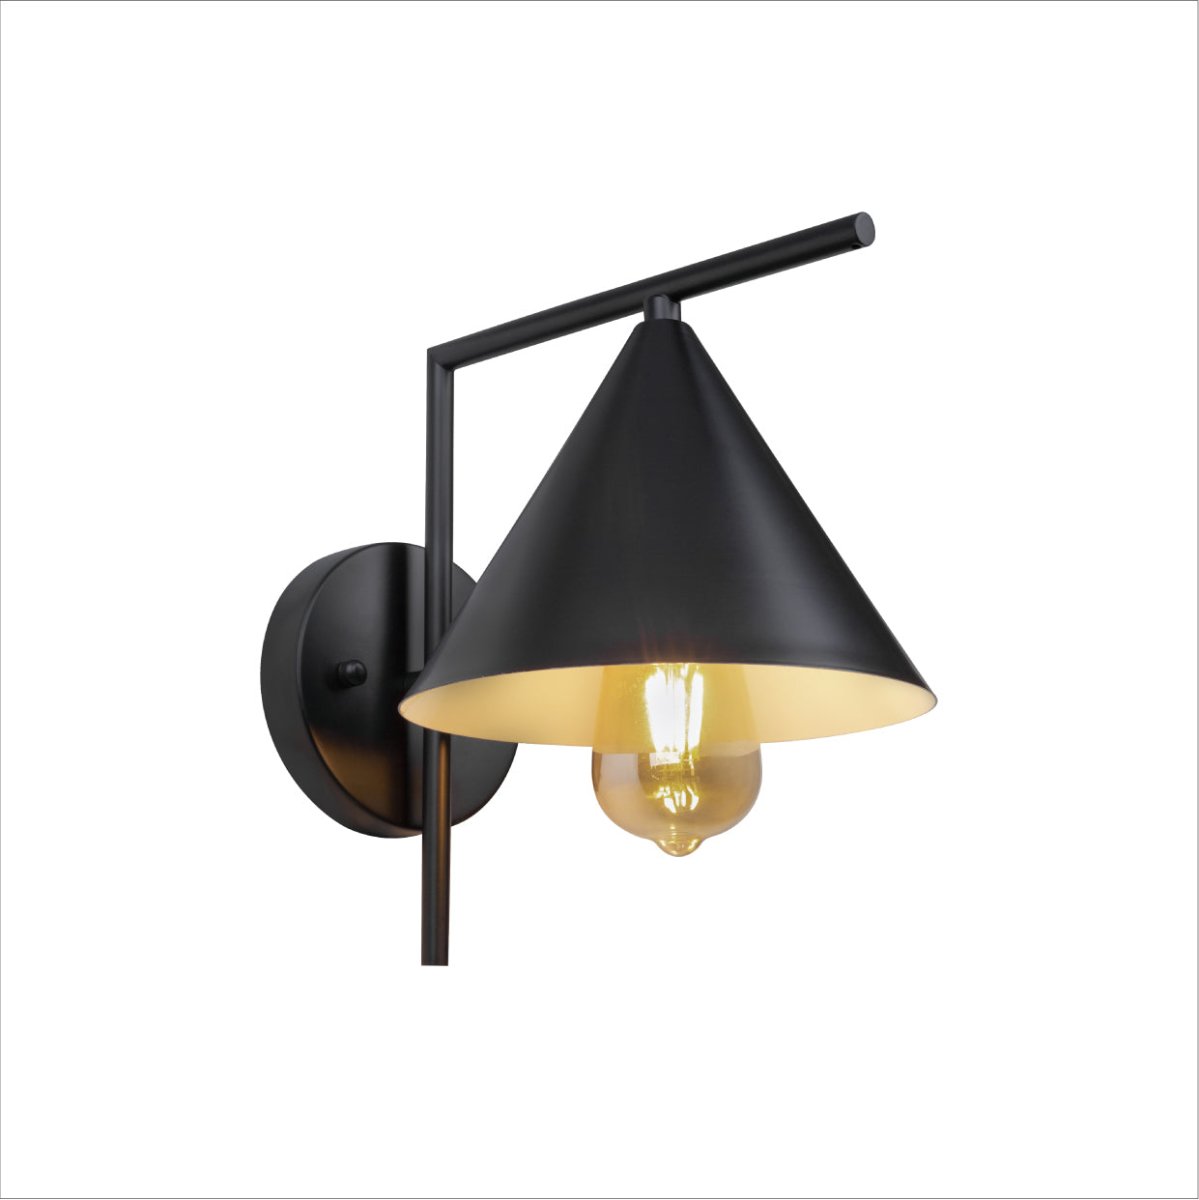 Main image of Black Metal Funnel Wall Light with E27 Fitting